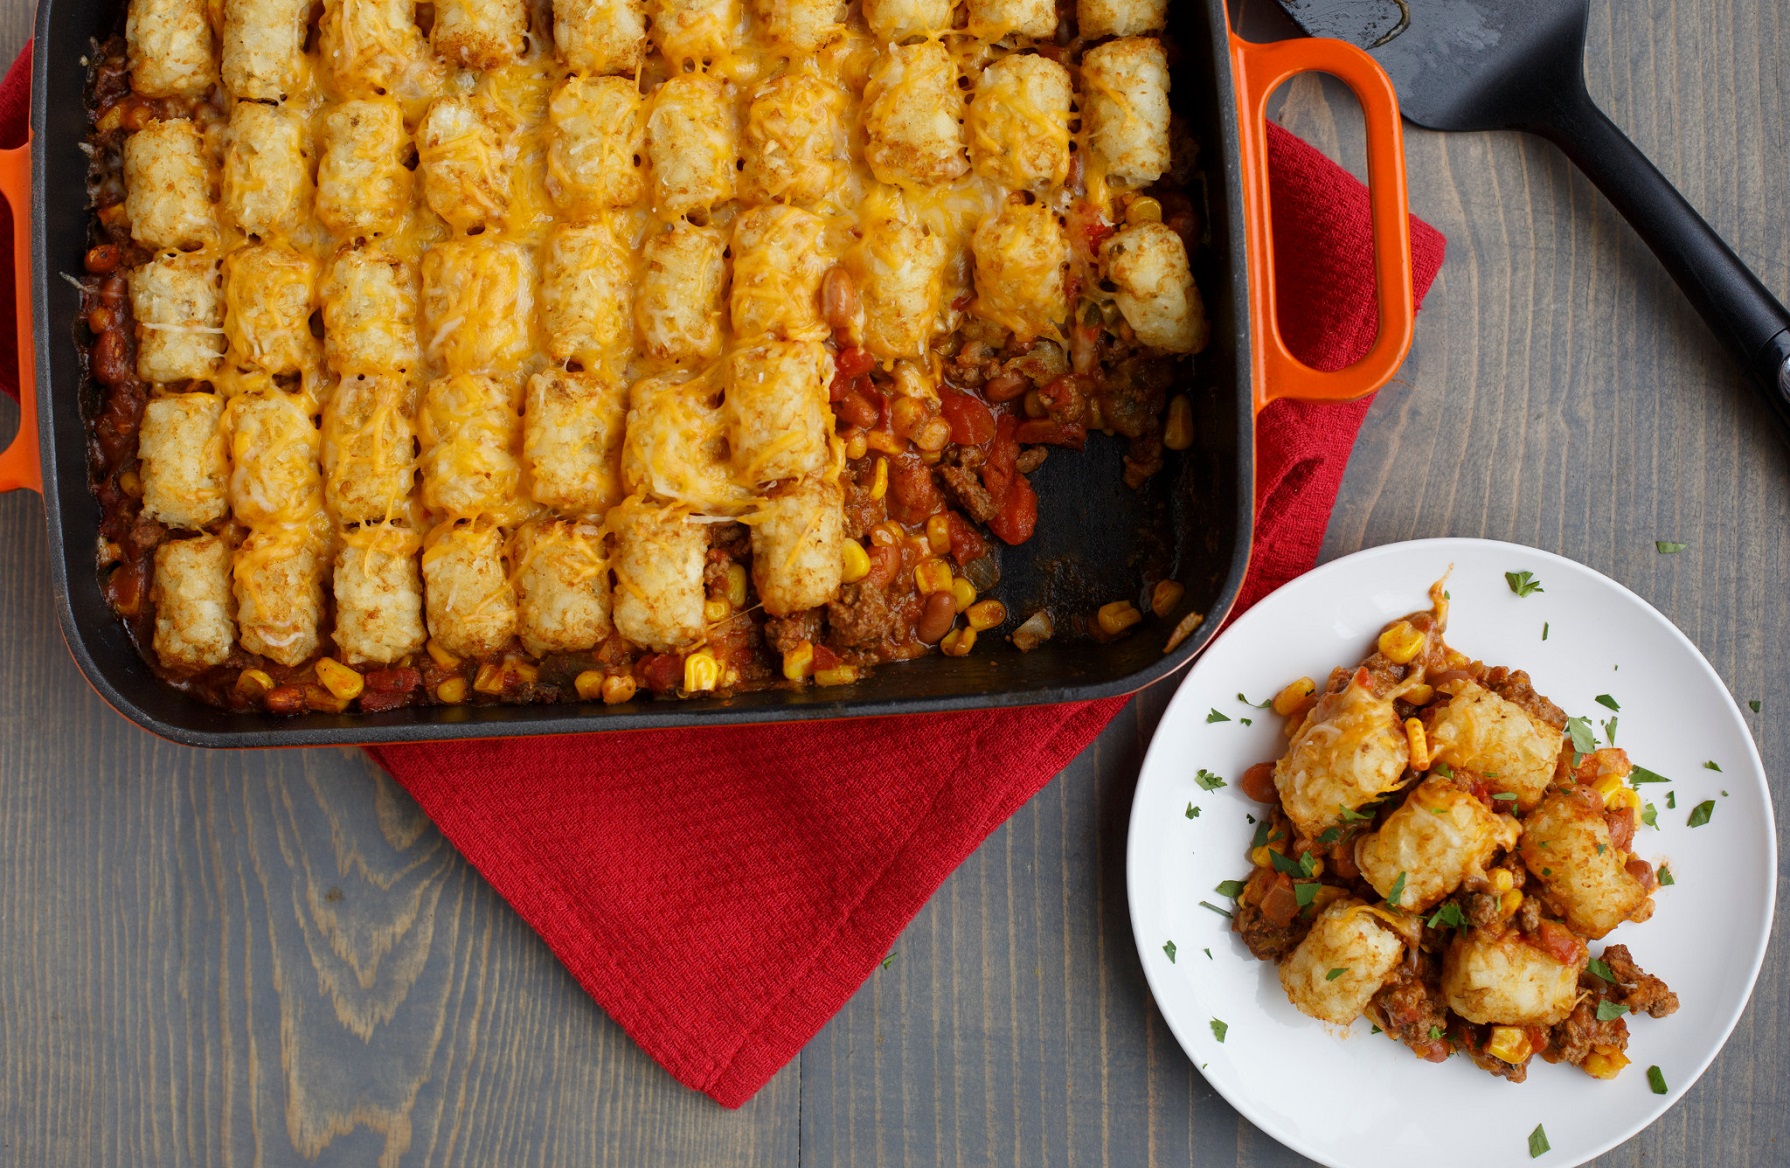 Download Easy Tater Tot Casserole Recipe Pictures